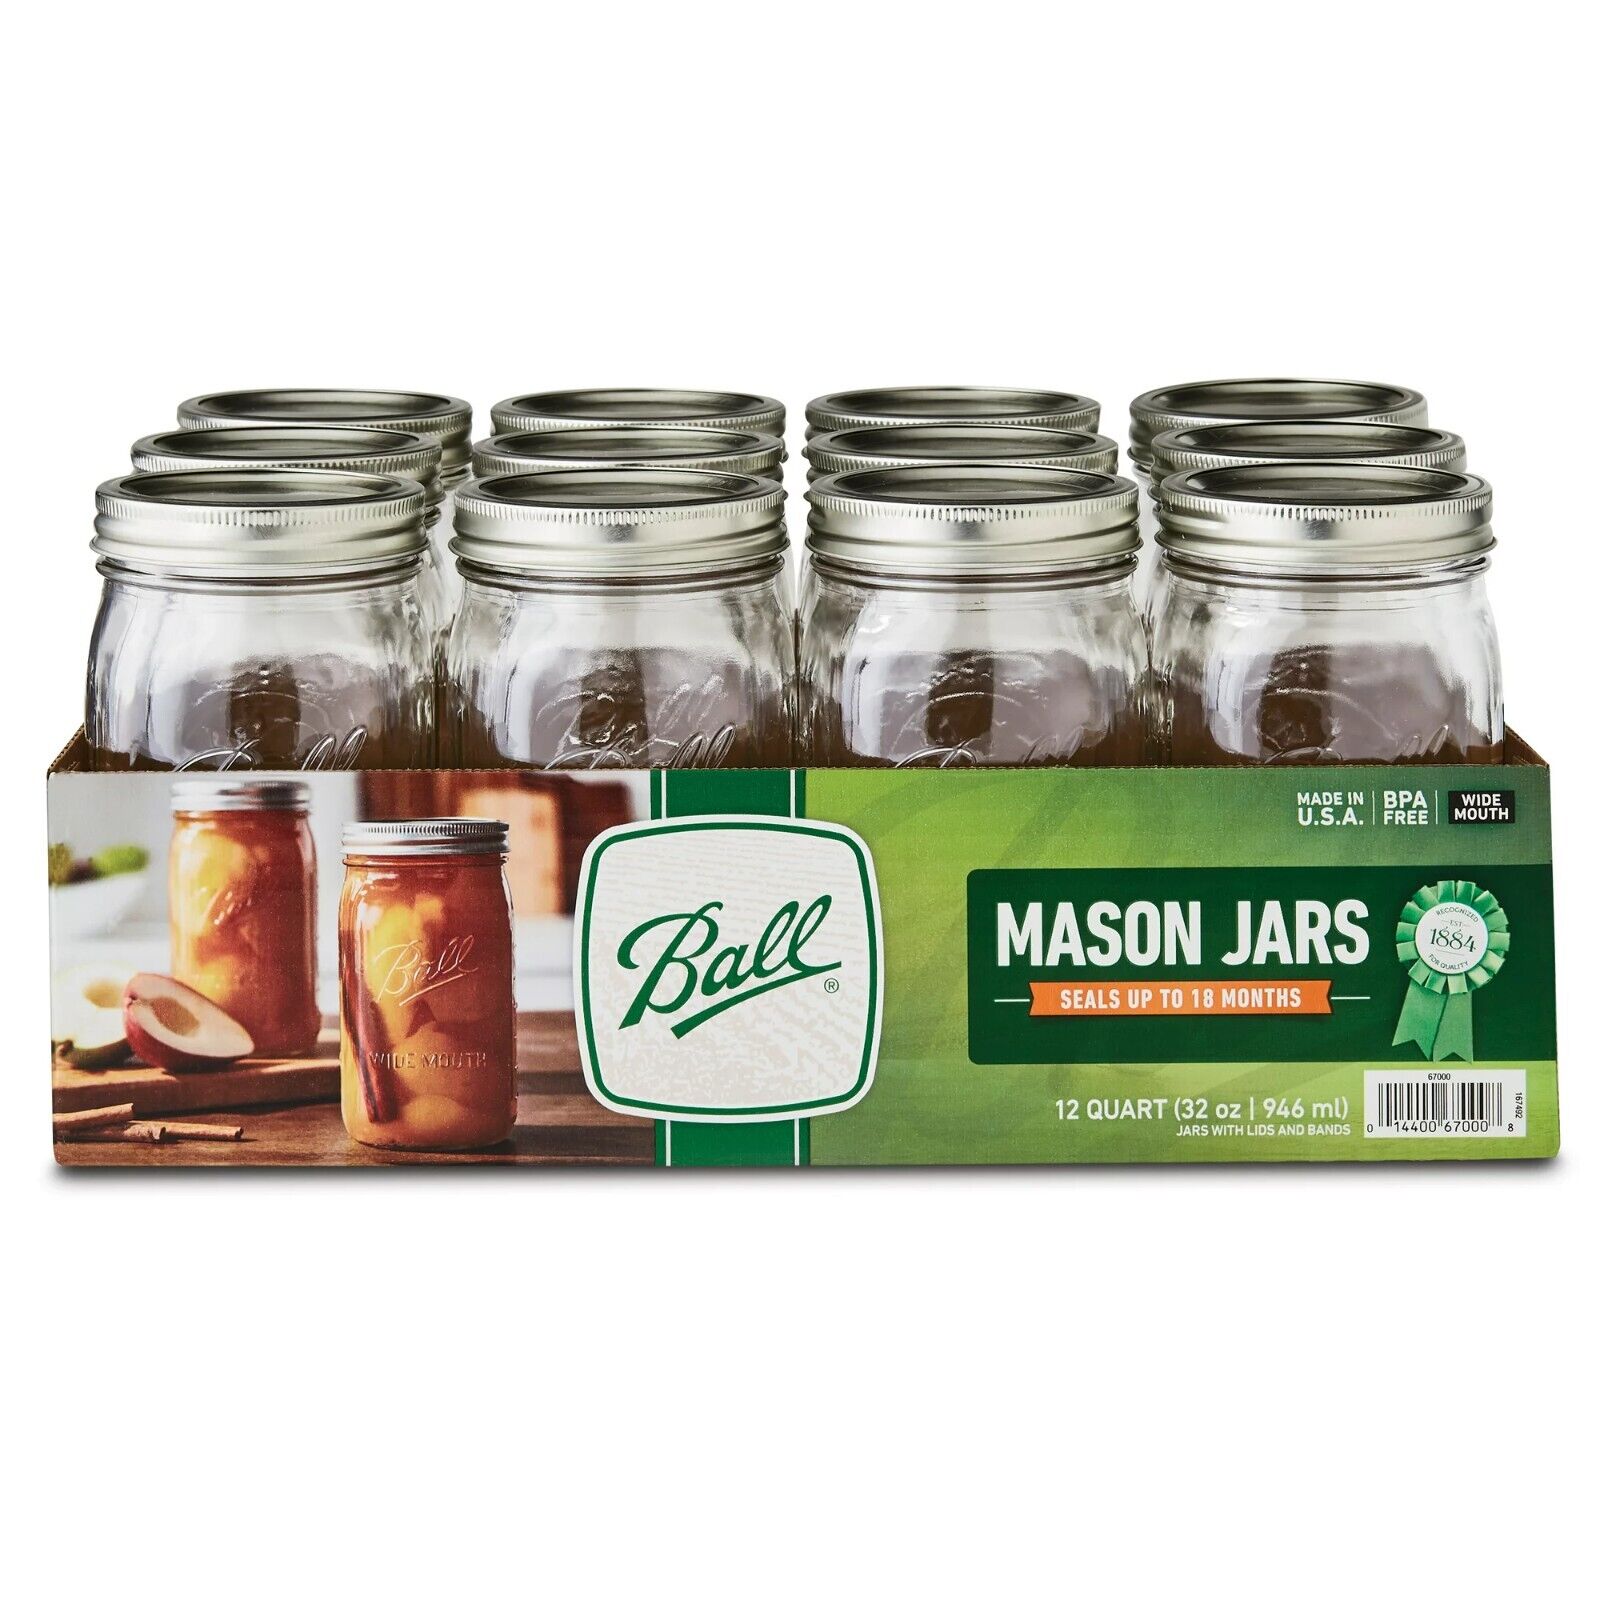 Ball Wide Mouth Quart Canning Mason Jars with Lids and Bands, 12 Count 32oz New